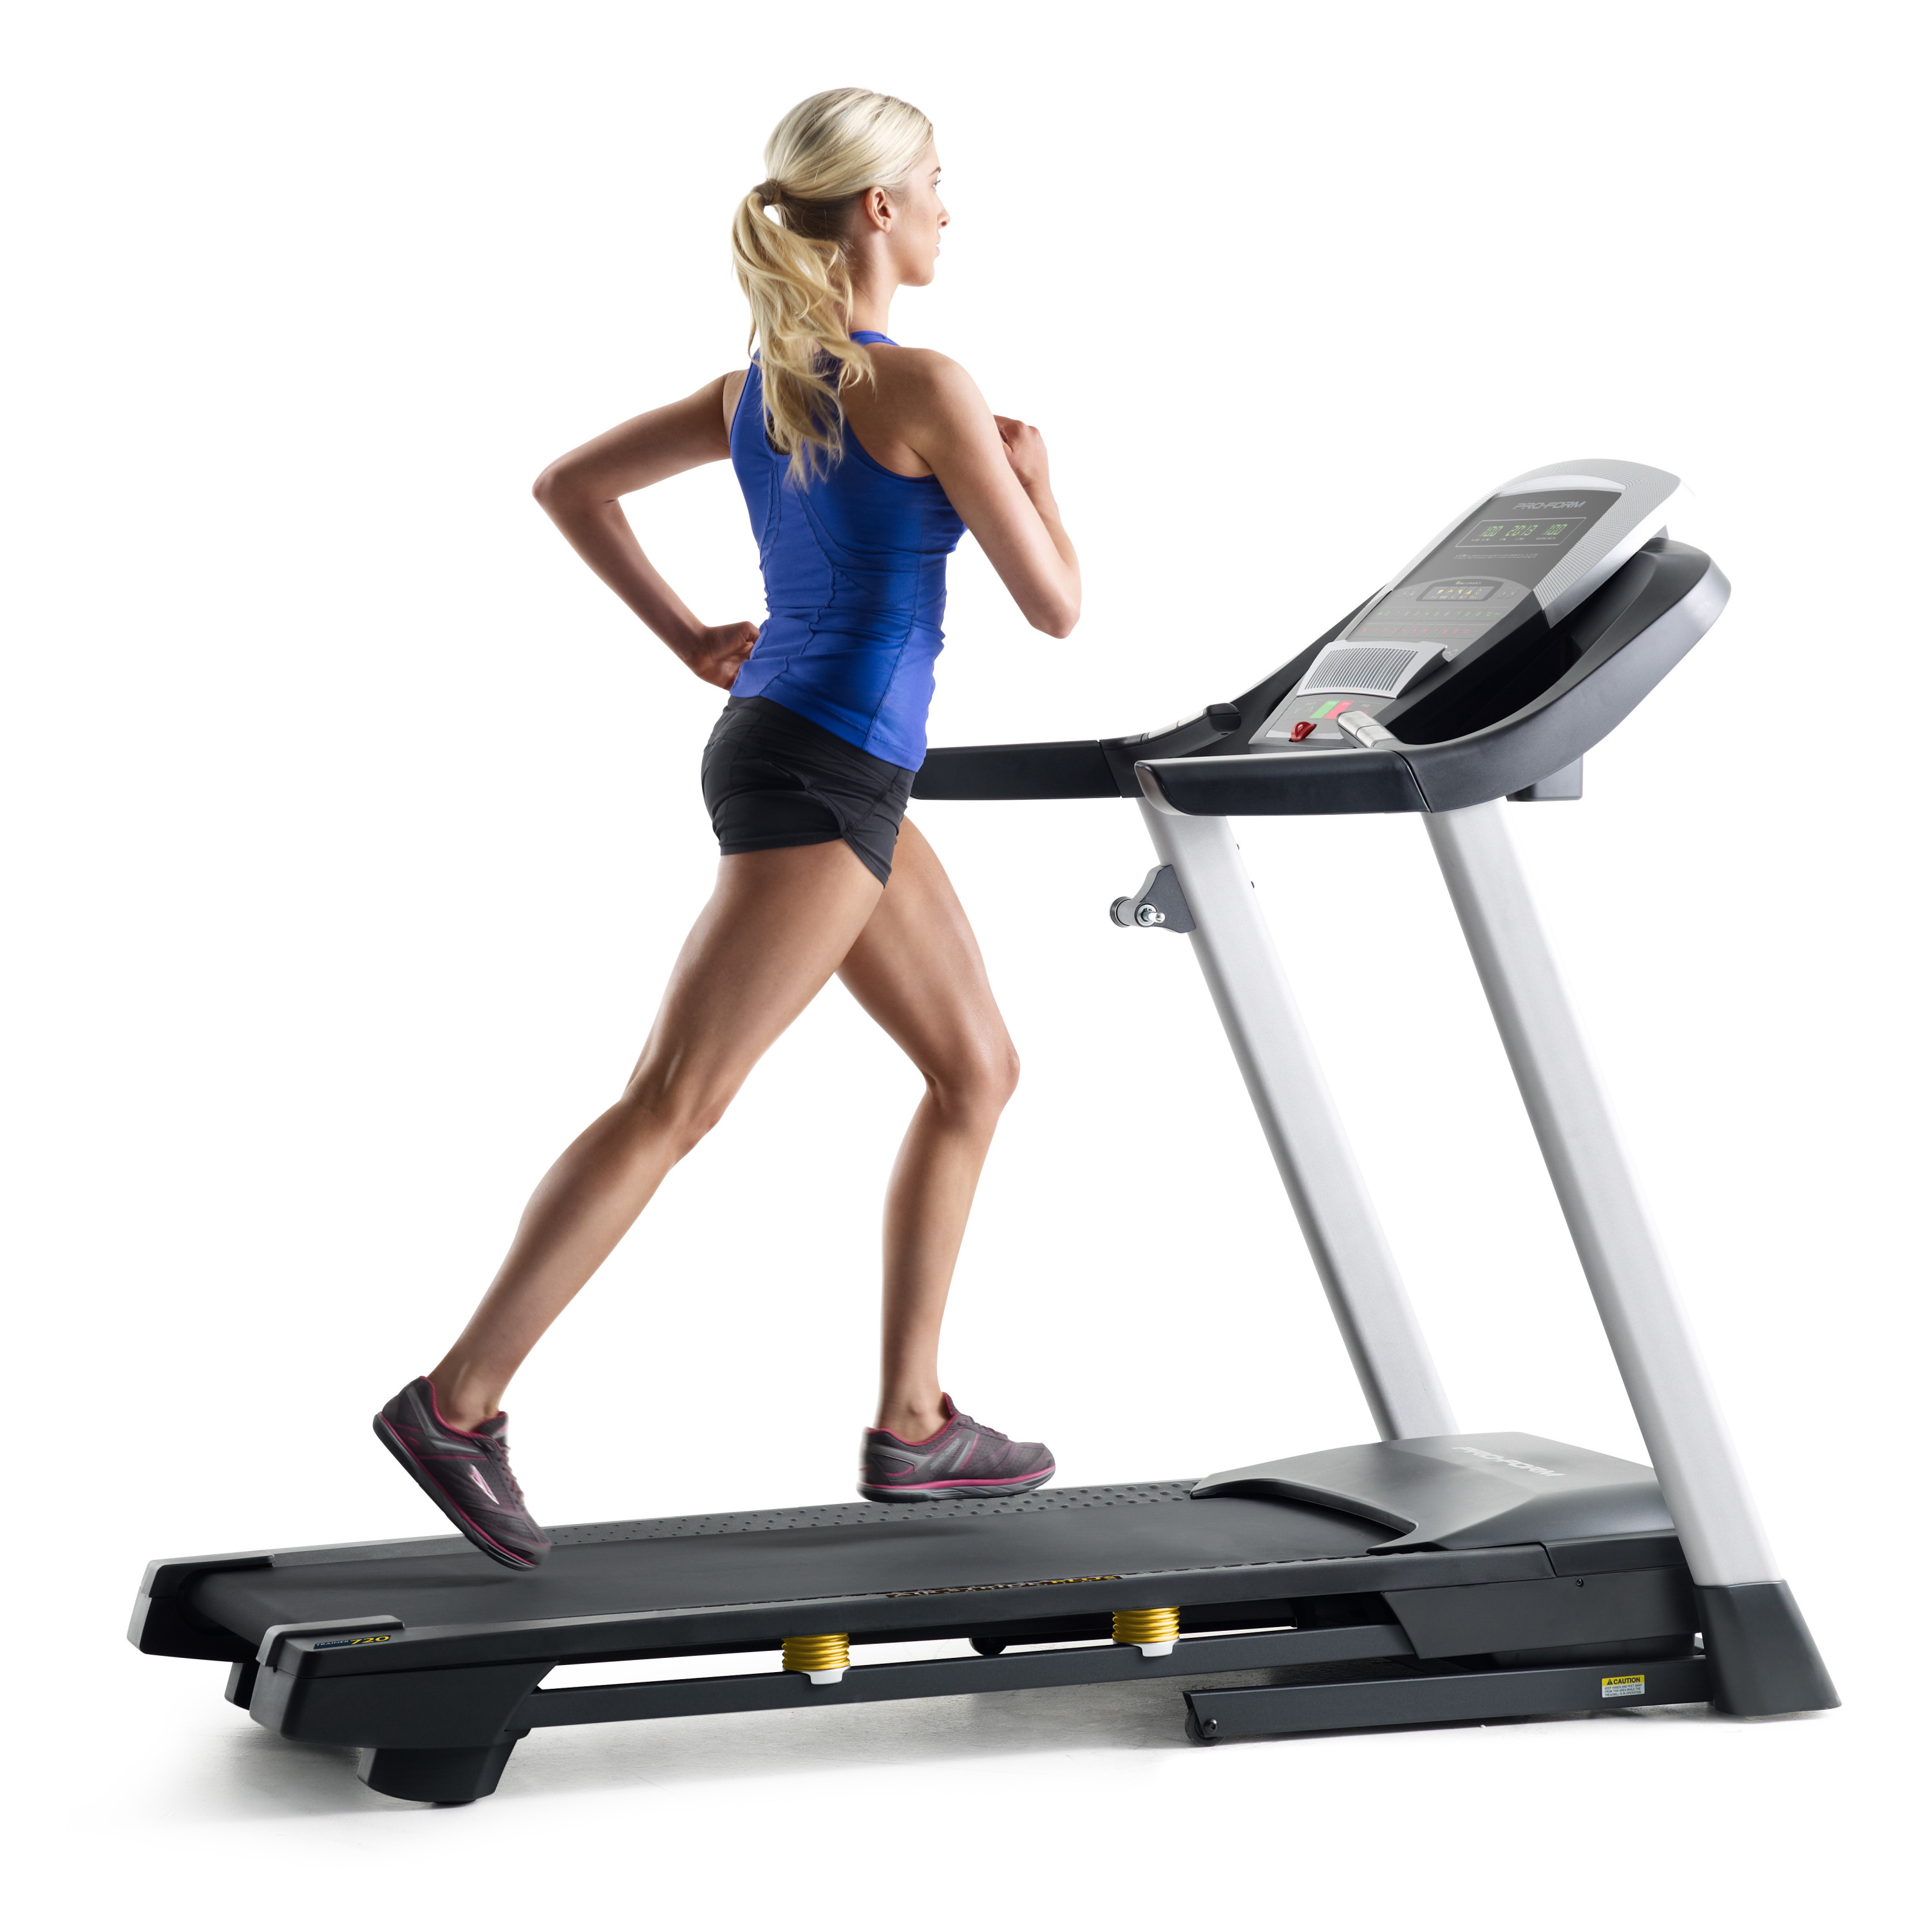 ProForm Trainer 720 Folding Treadmill with 10% Incline Training and 10 MPH Speed Controls - image 1 of 5